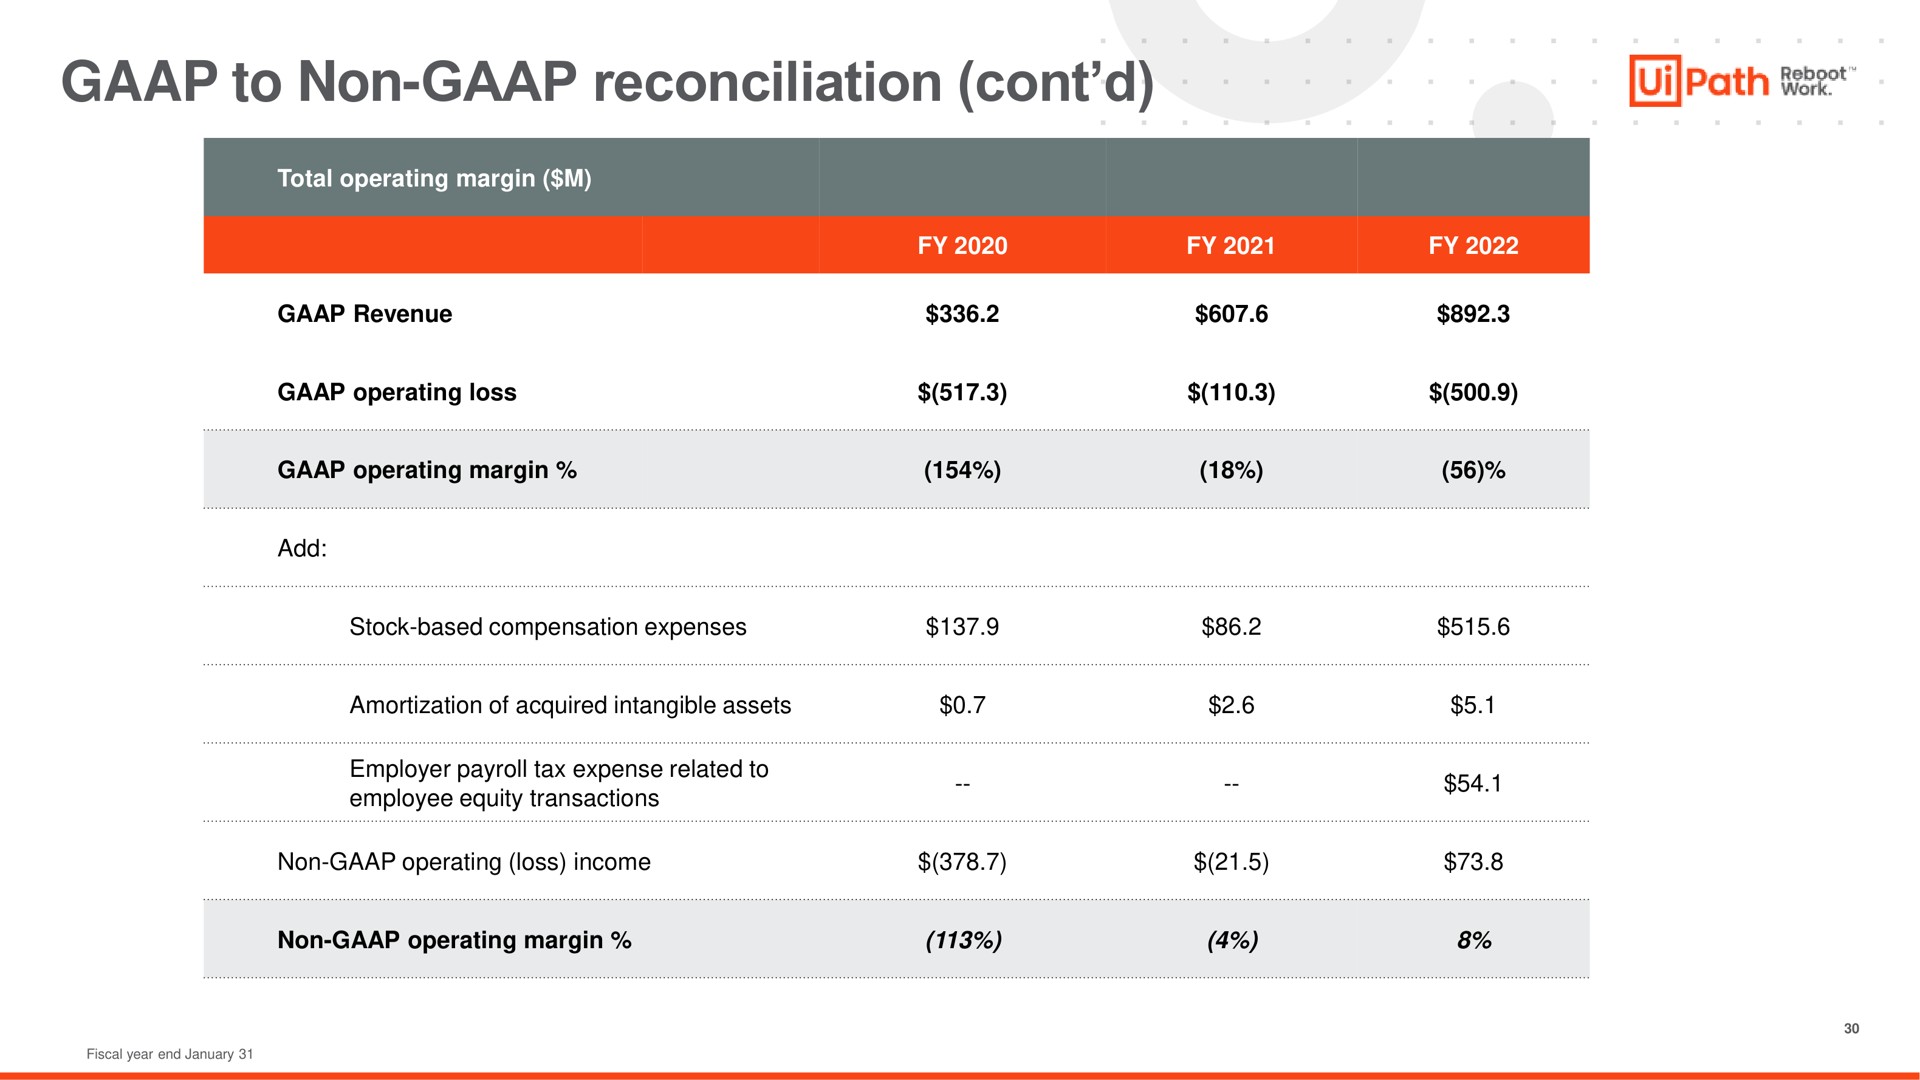 to non reconciliation path wer employee equity transactions | UiPath